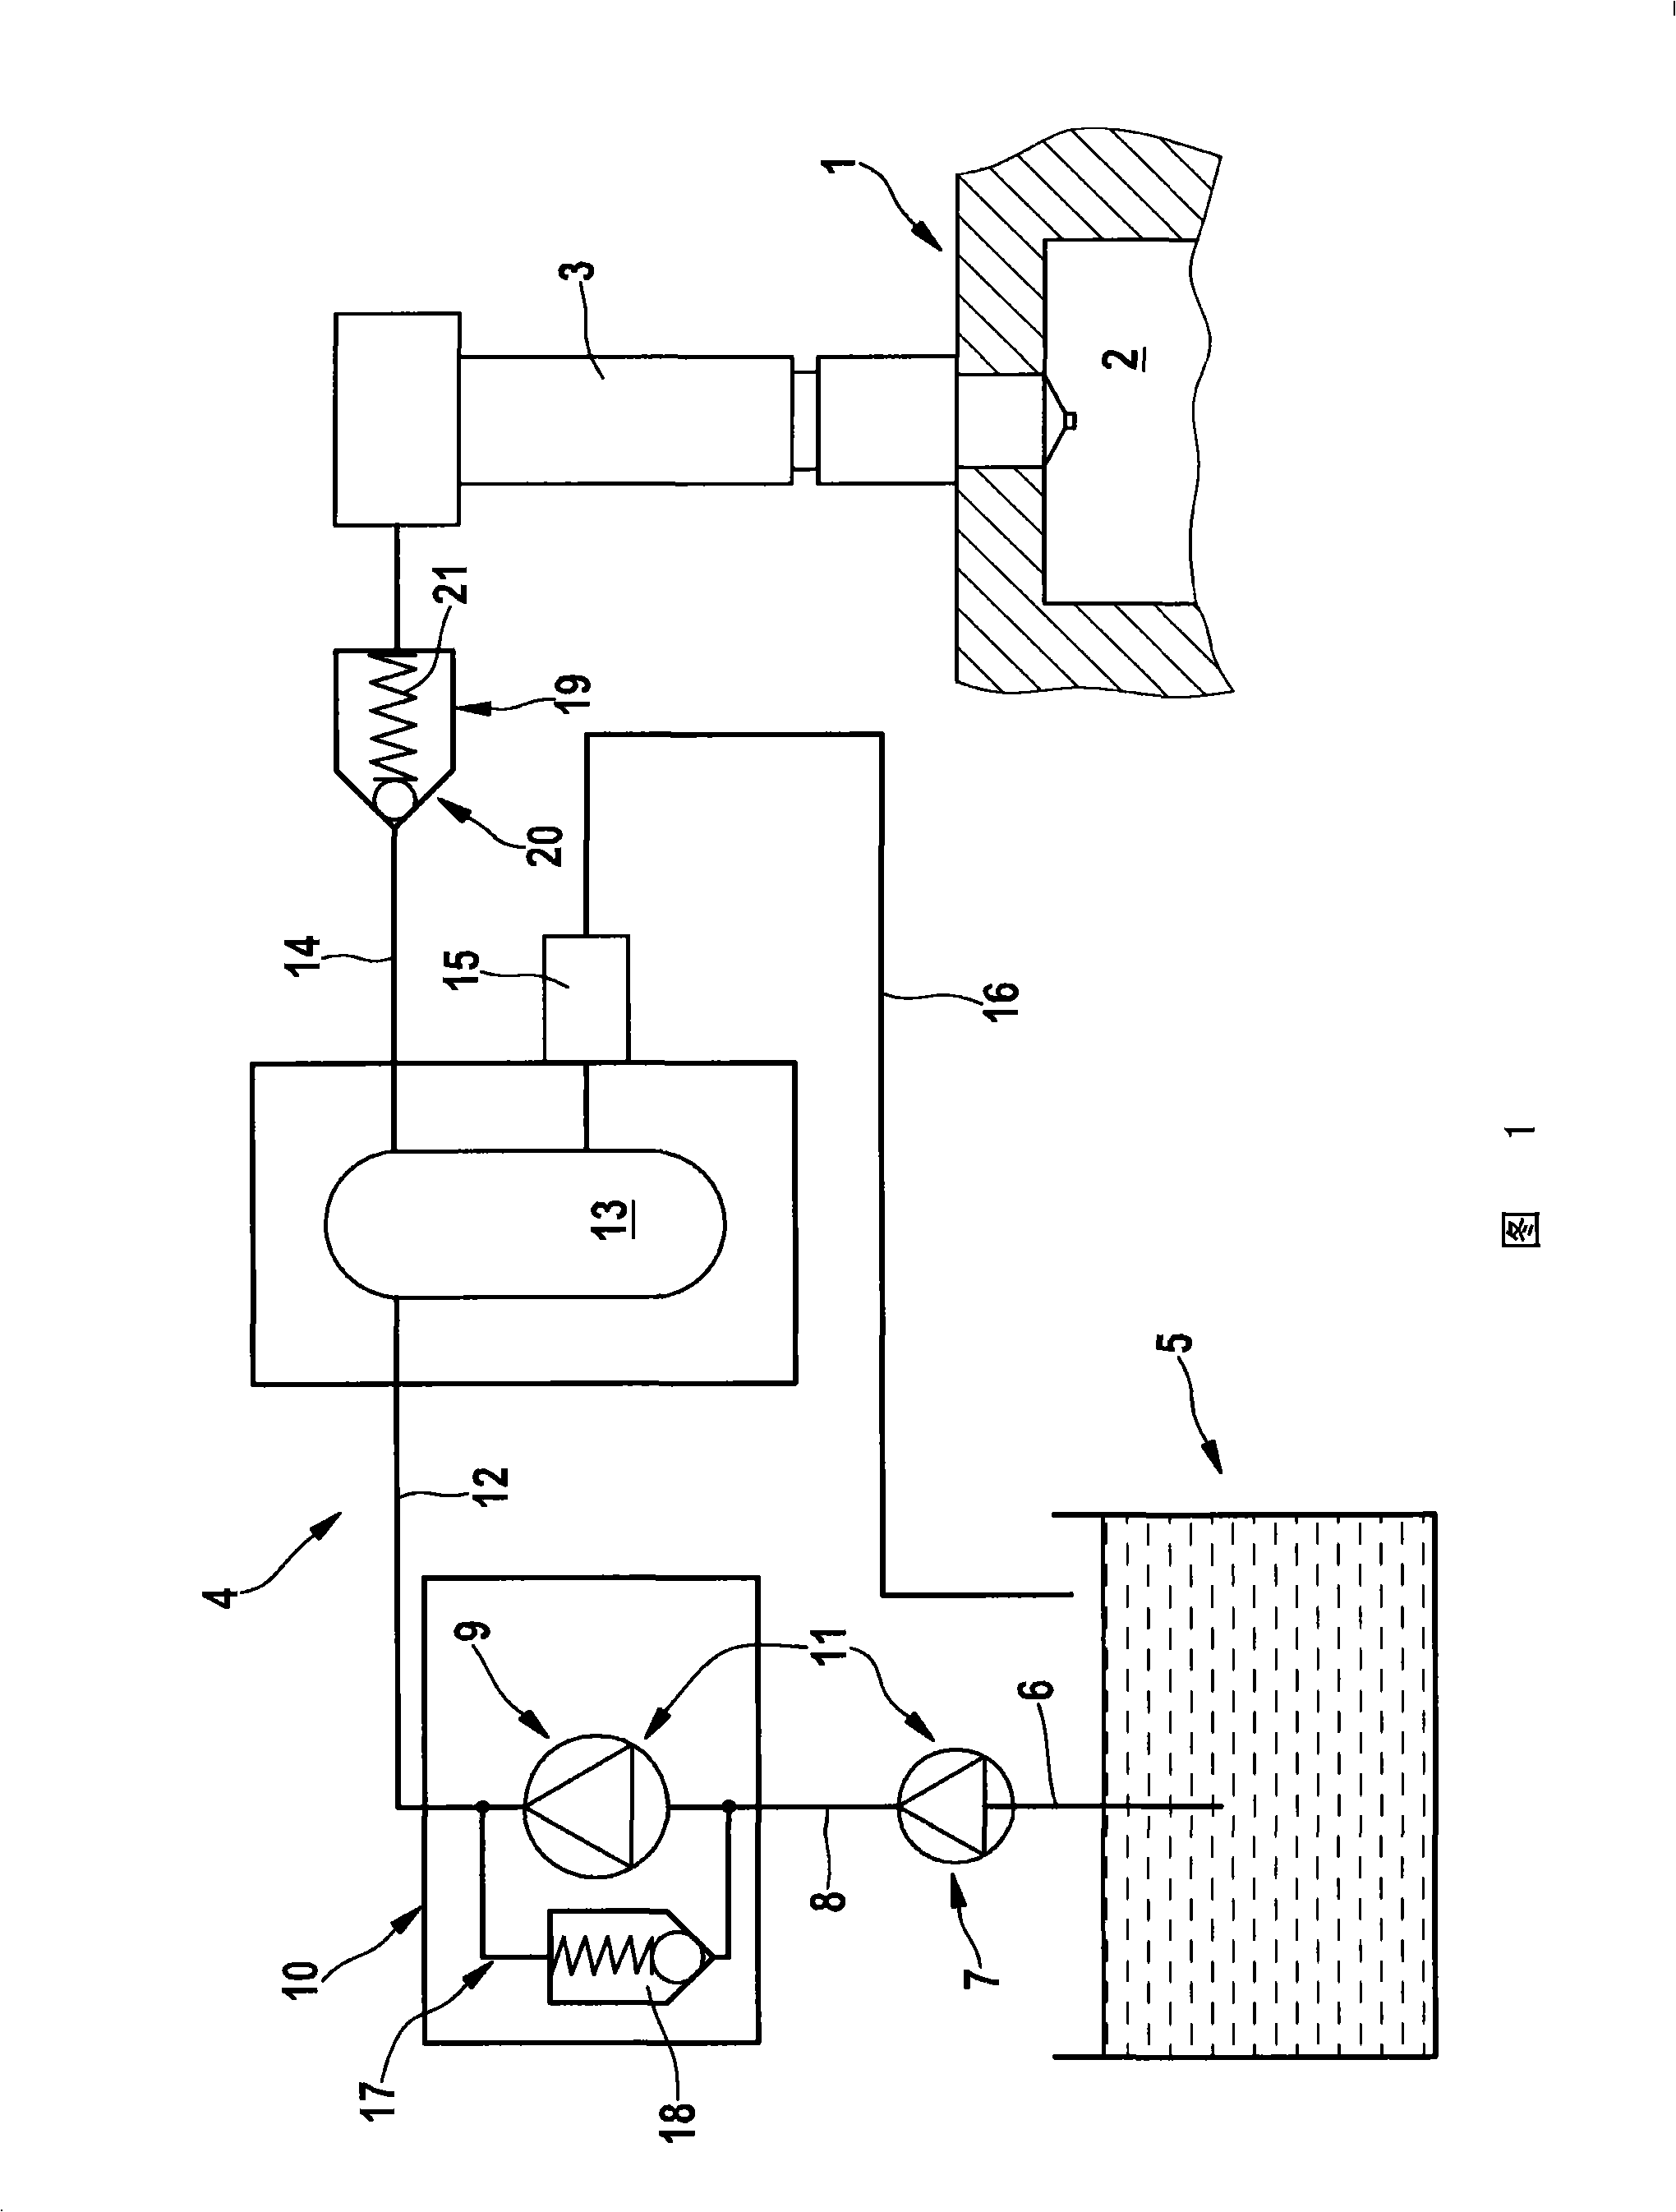 Injector system for combustion engines operated on fuel, in particular heavy oil